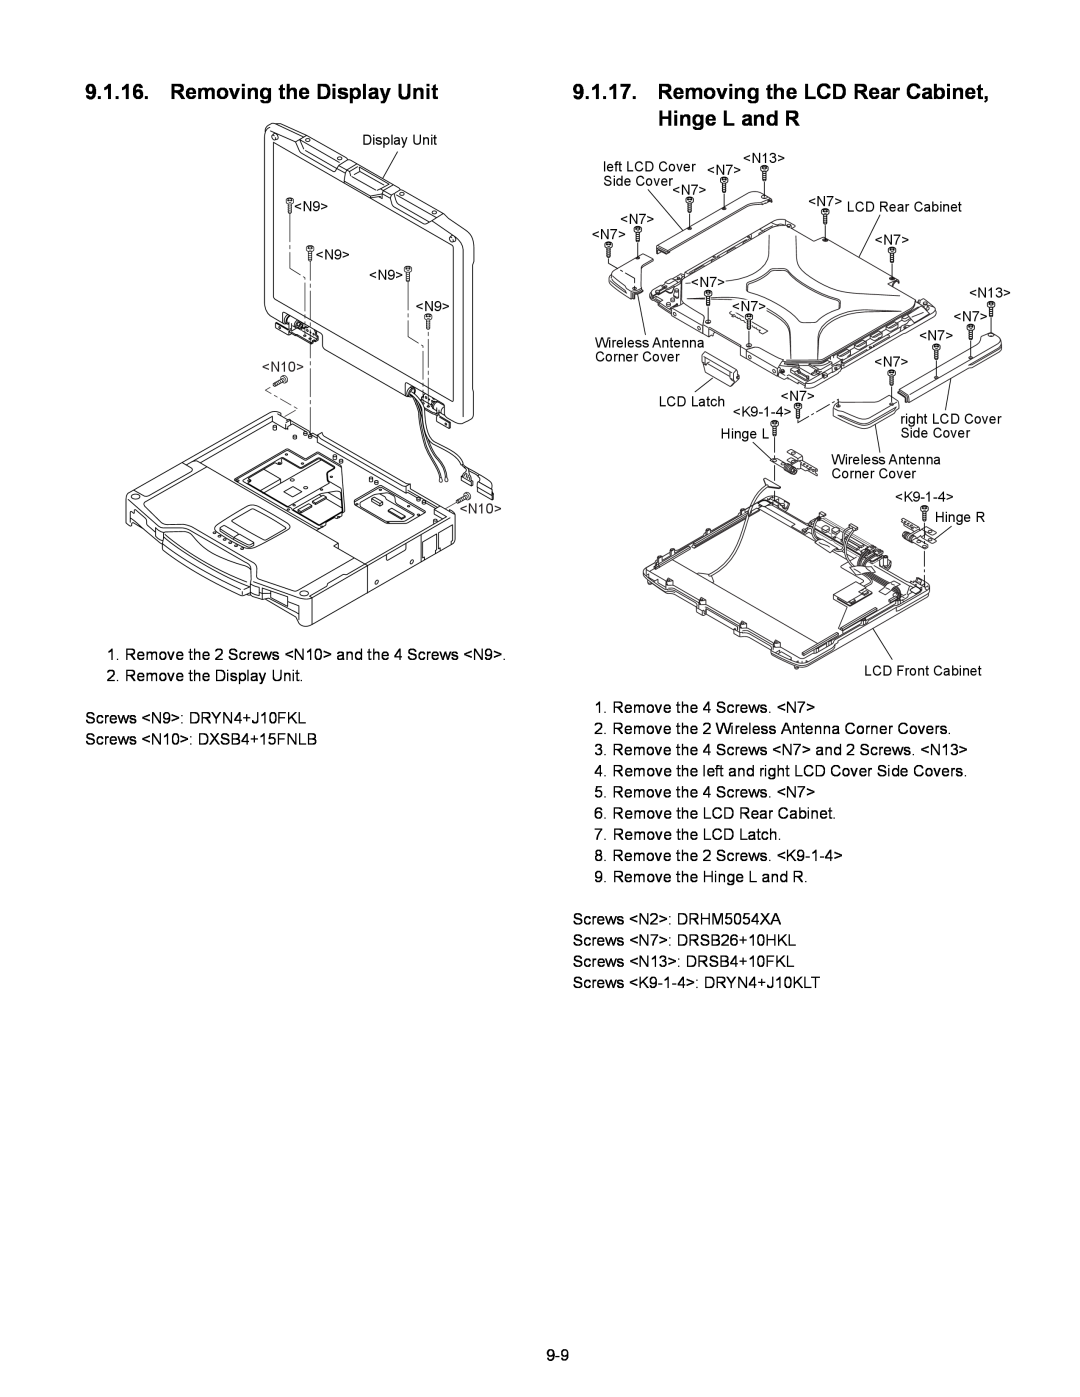 Matsushita CF-30 service manual Removing the Display Unit, Removing the LCD Rear Cabinet, Hinge L and R 